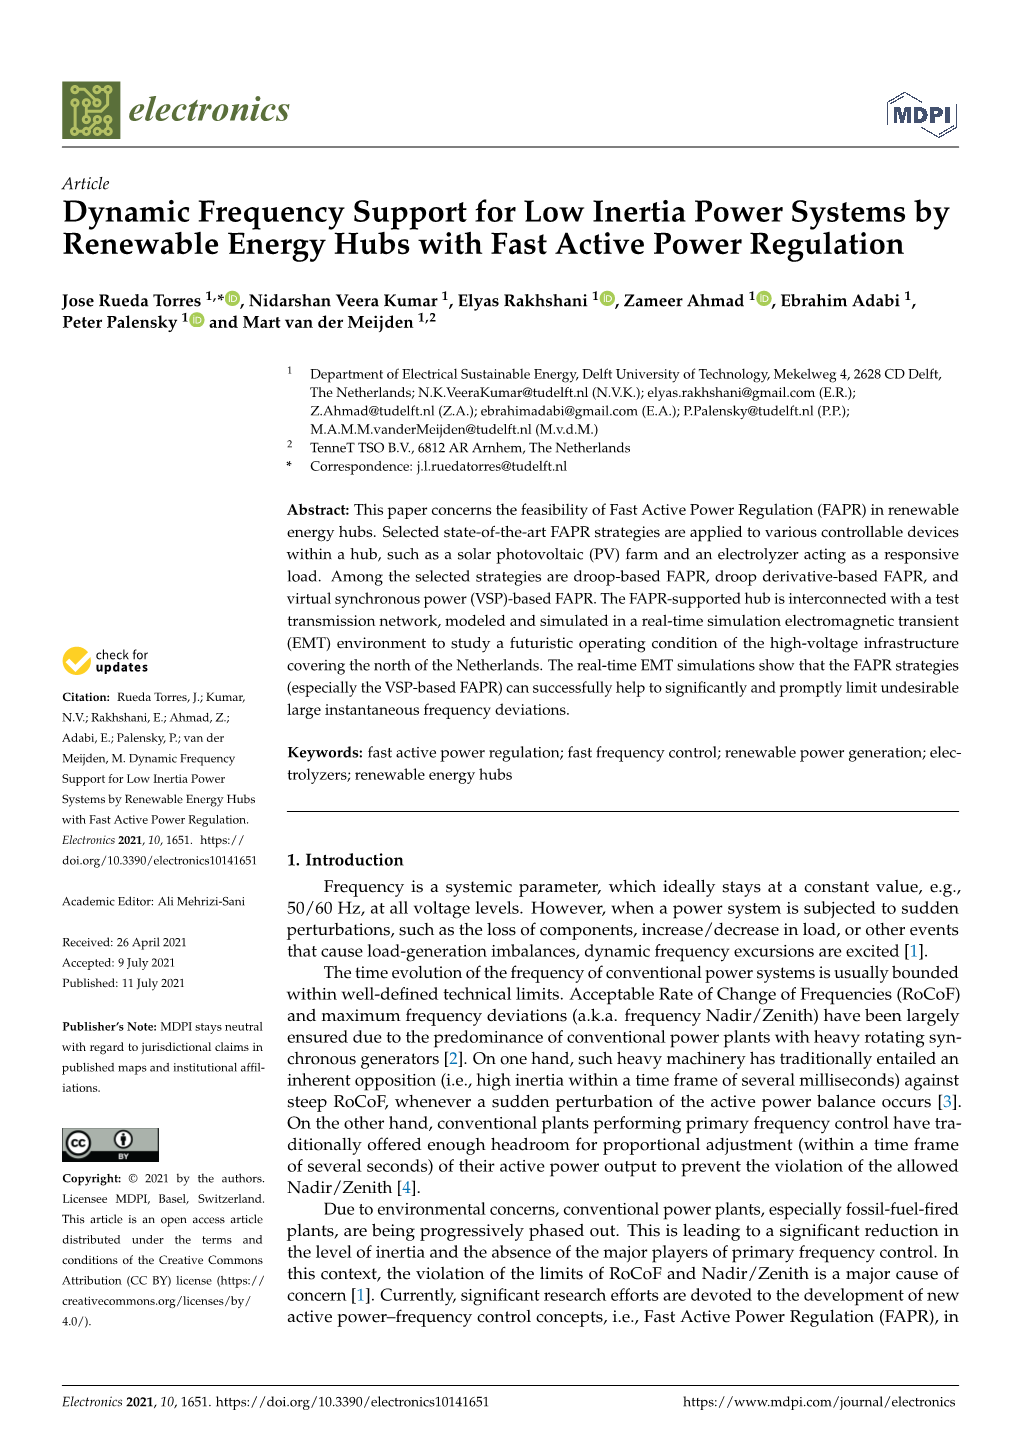 Dynamic Frequency Support for Low Inertia Power Systems by Renewable Energy Hubs with Fast Active Power Regulation